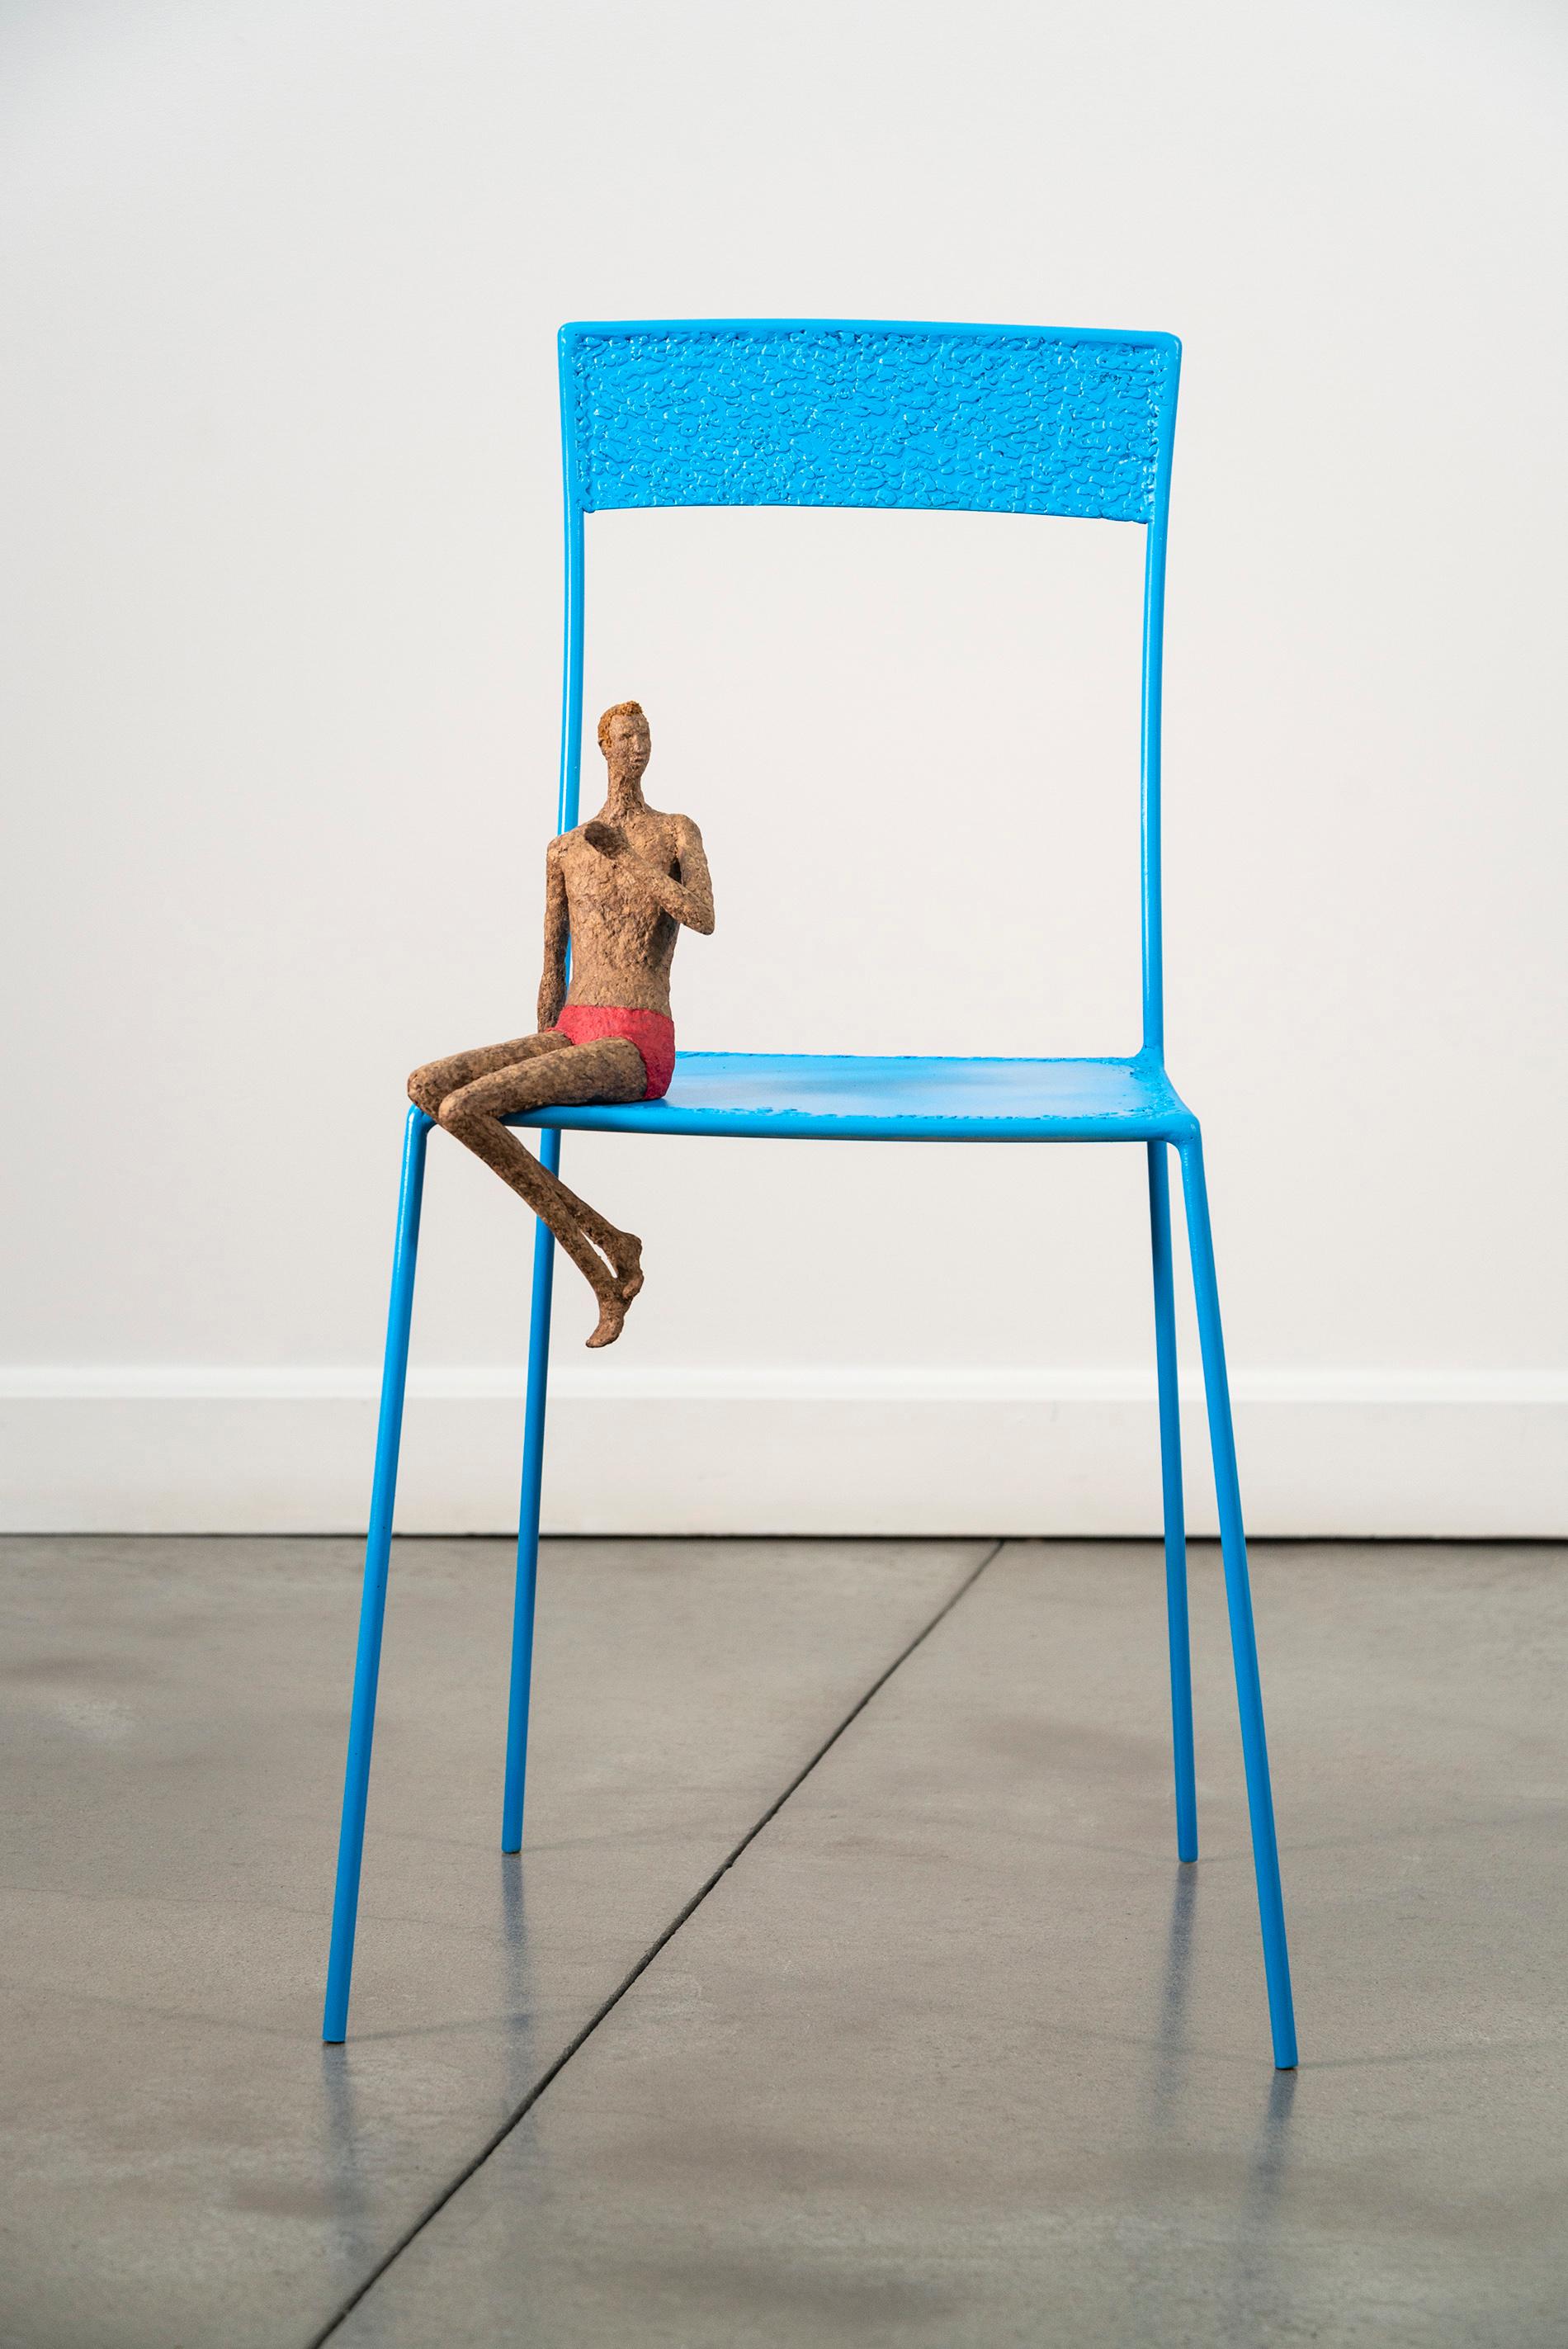 Equally fun and compelling, this new contemporary sculpture from Paul Duval immediately engages the viewer. On a large metal chair (la grande chaise) painted a bright blue, a figure sits, clad only in red shorts, leaning on one arm and gesturing